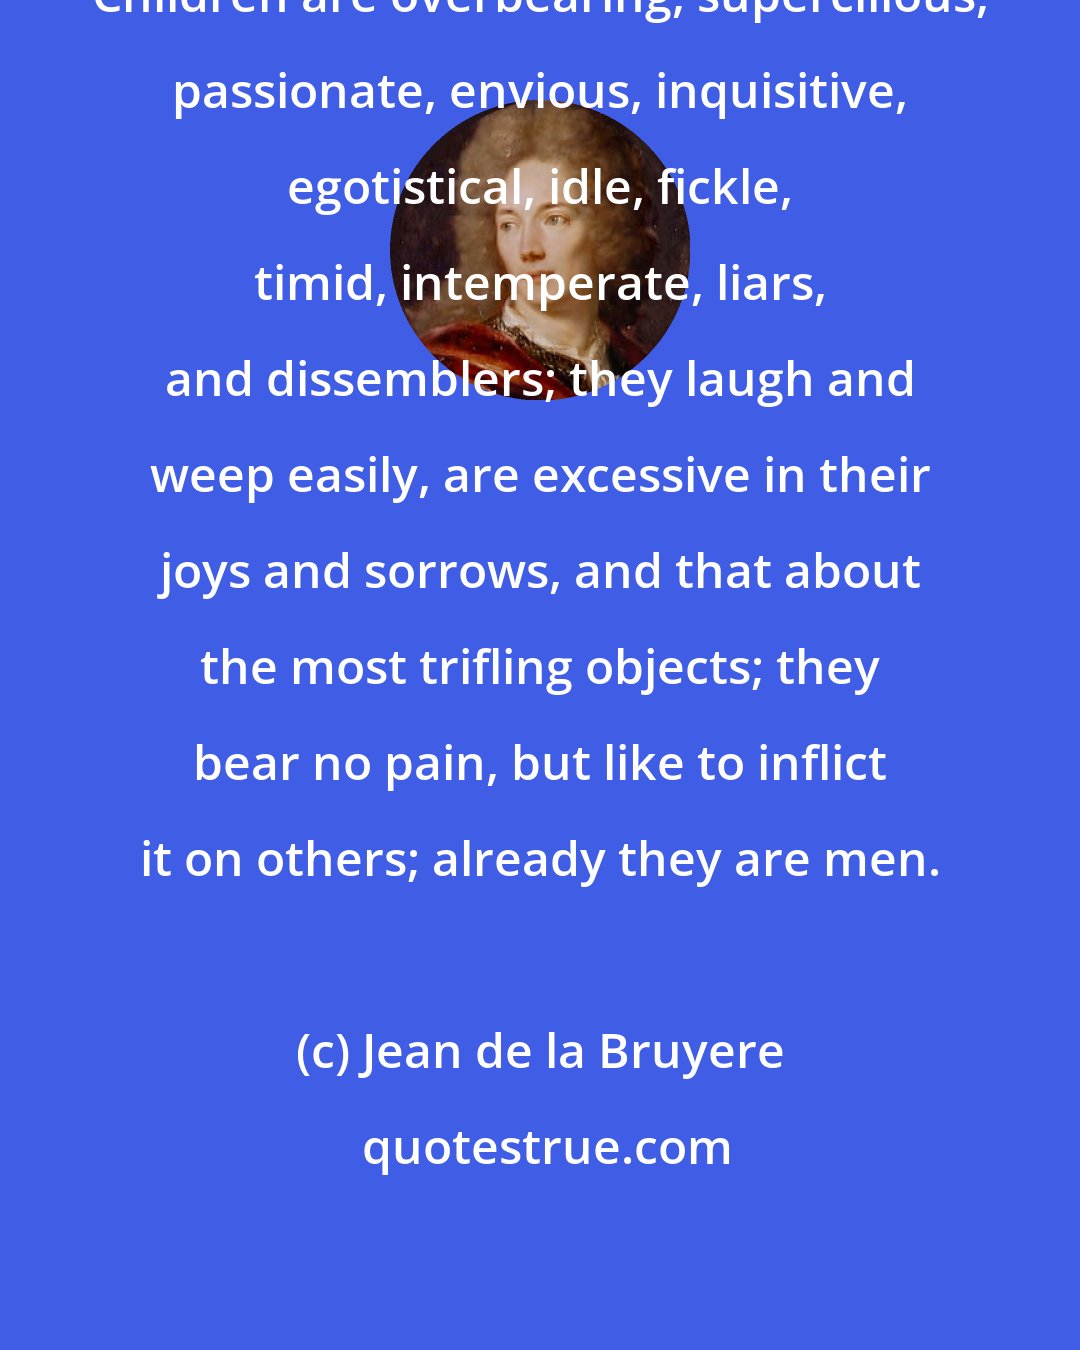 Jean de la Bruyere: Children are overbearing, supercilious, passionate, envious, inquisitive, egotistical, idle, fickle, timid, intemperate, liars, and dissemblers; they laugh and weep easily, are excessive in their joys and sorrows, and that about the most trifling objects; they bear no pain, but like to inflict it on others; already they are men.